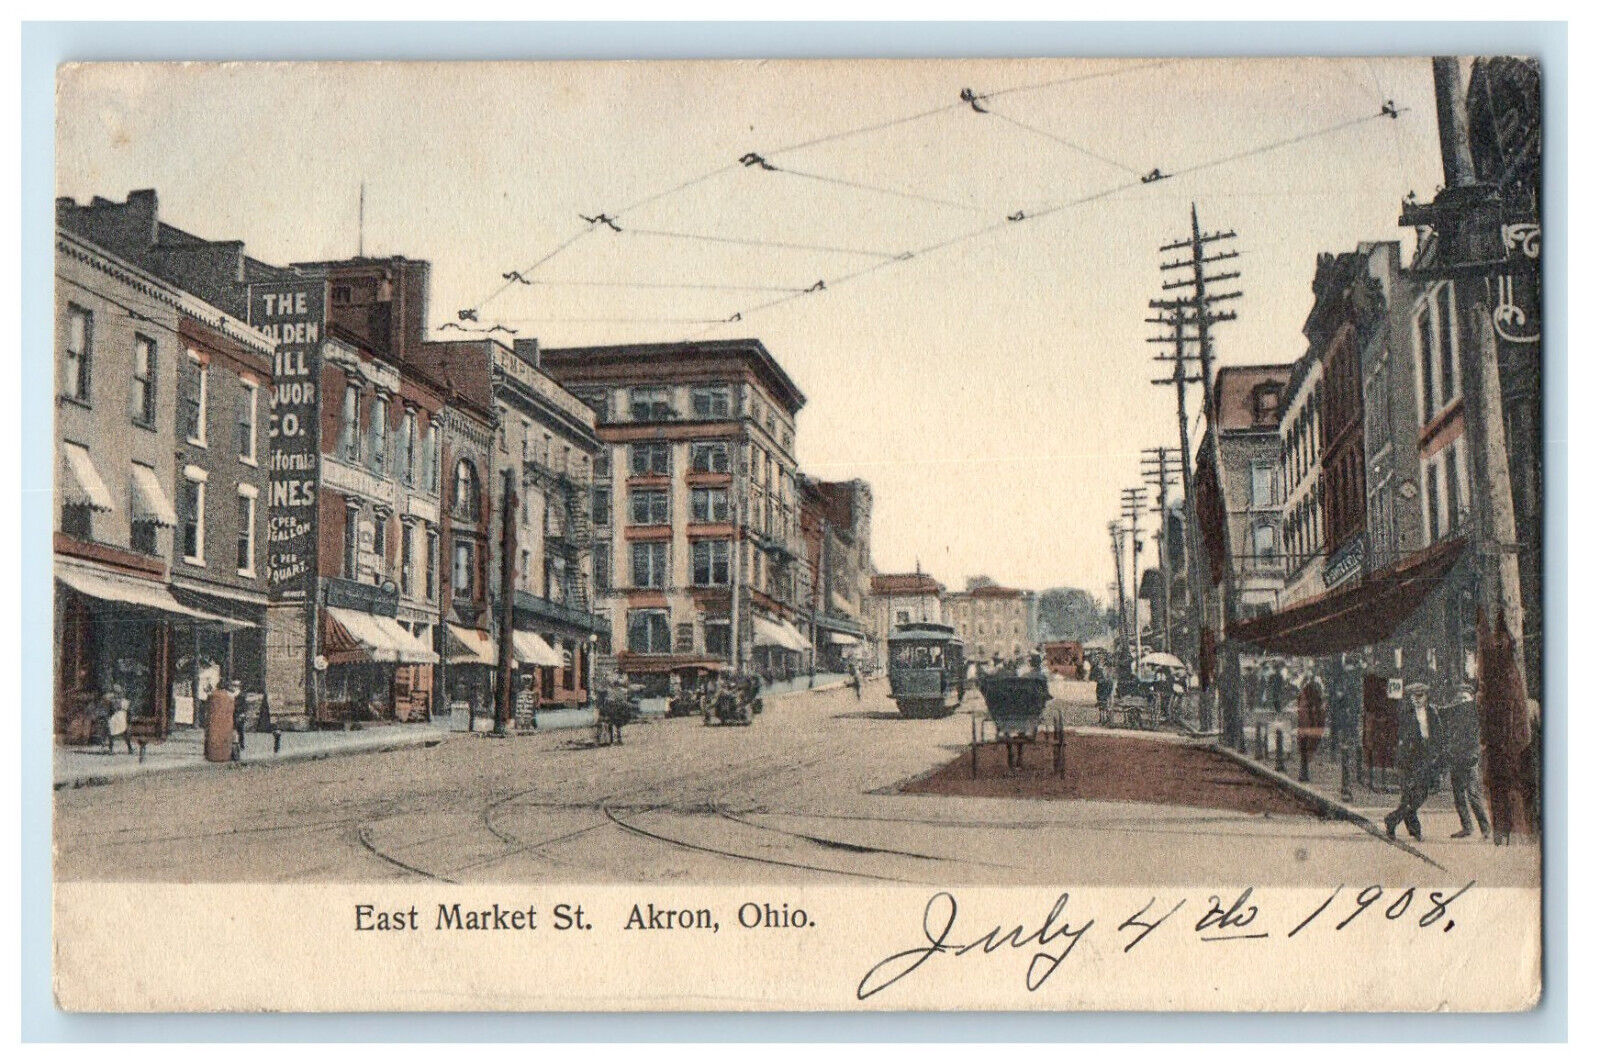 1908 Trolley Car, Horse Carriage Businesses, East Market St. Akron OH Postcard